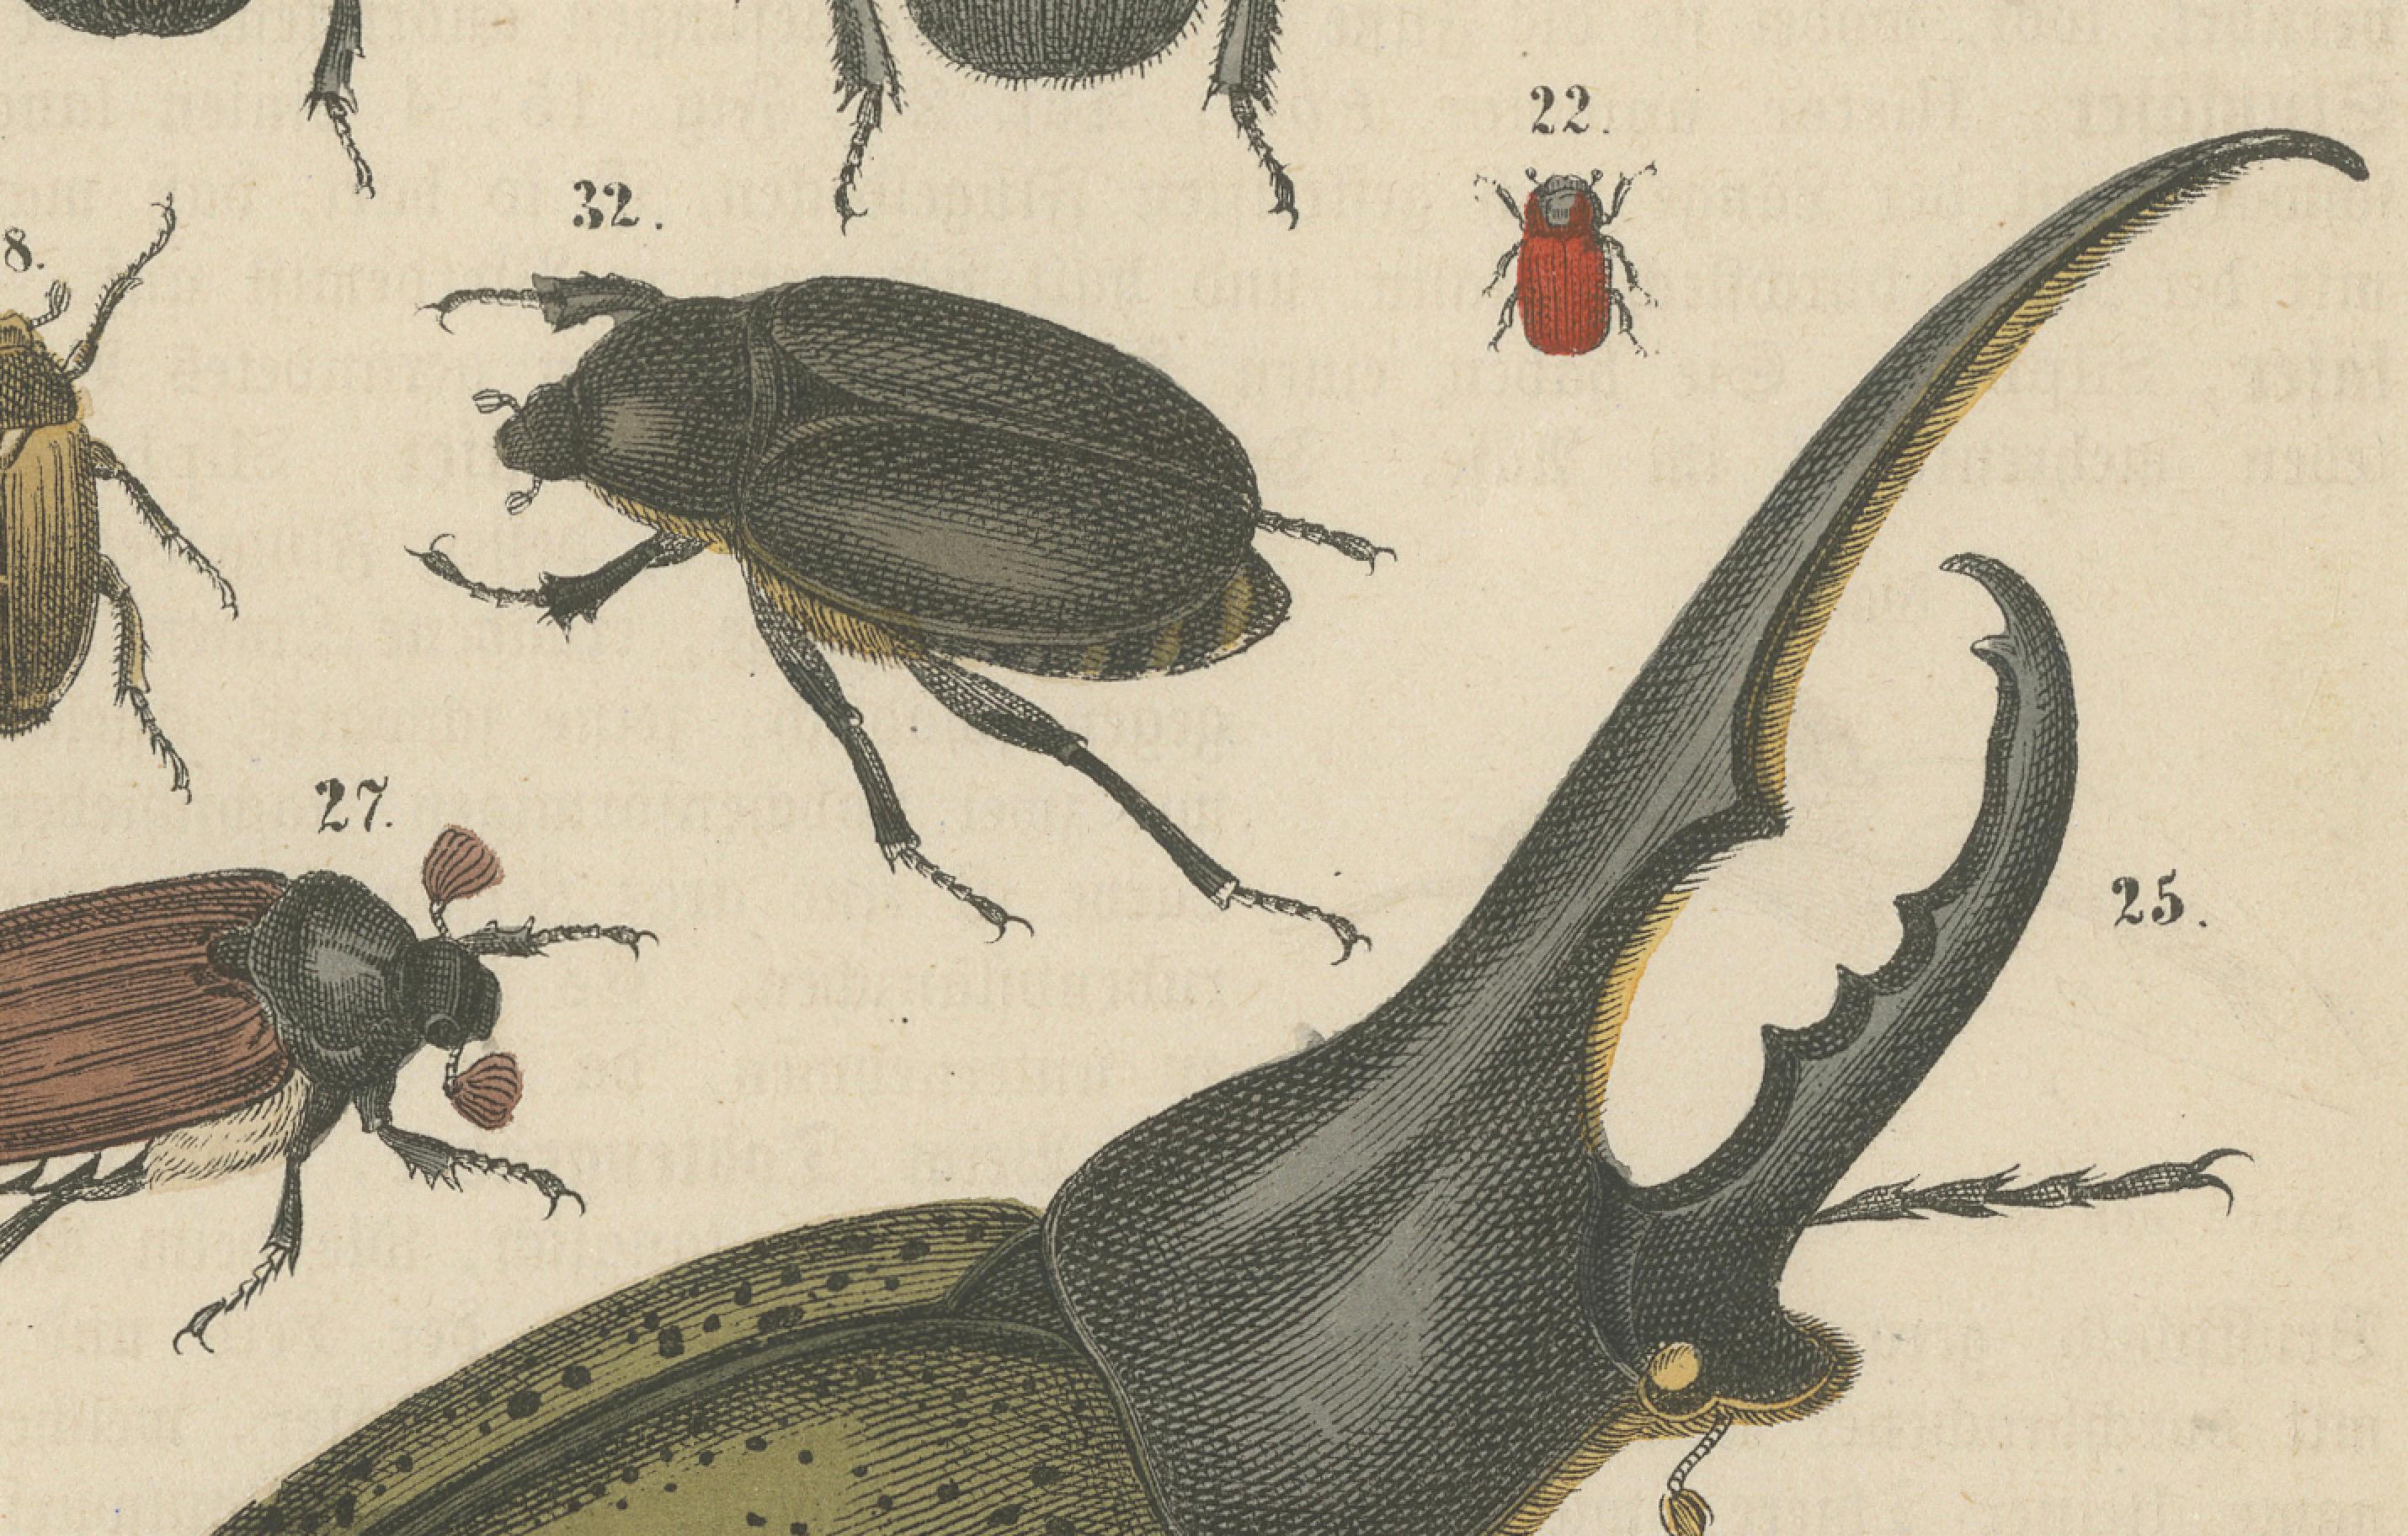 Set of 2 Antique Prints of various Beetles including a Rhinoceros Beetle For Sale 2